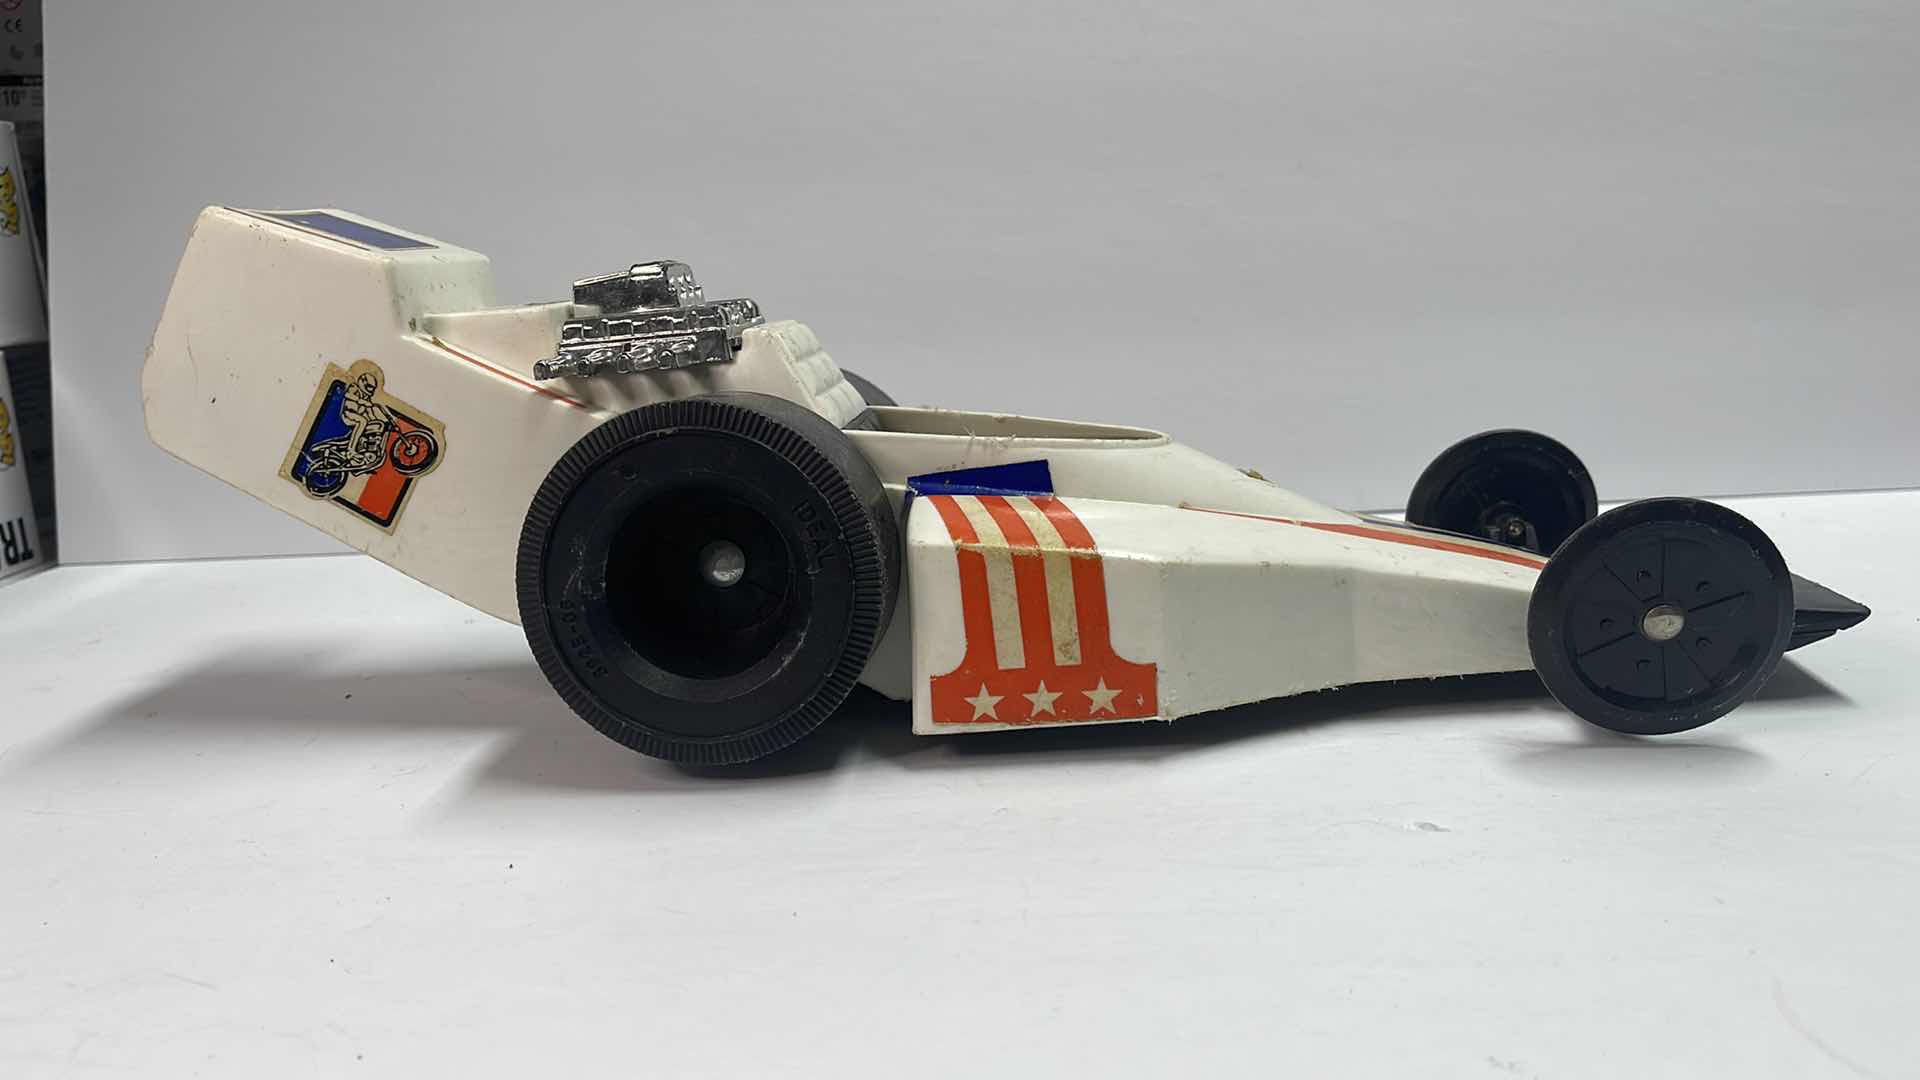 Photo 1 of VINTAGE 1974 EVEL KNIEVEL FORMULA ONE DRAGSTER - PLEASE READ NOTES FOR MORE INFORMATION